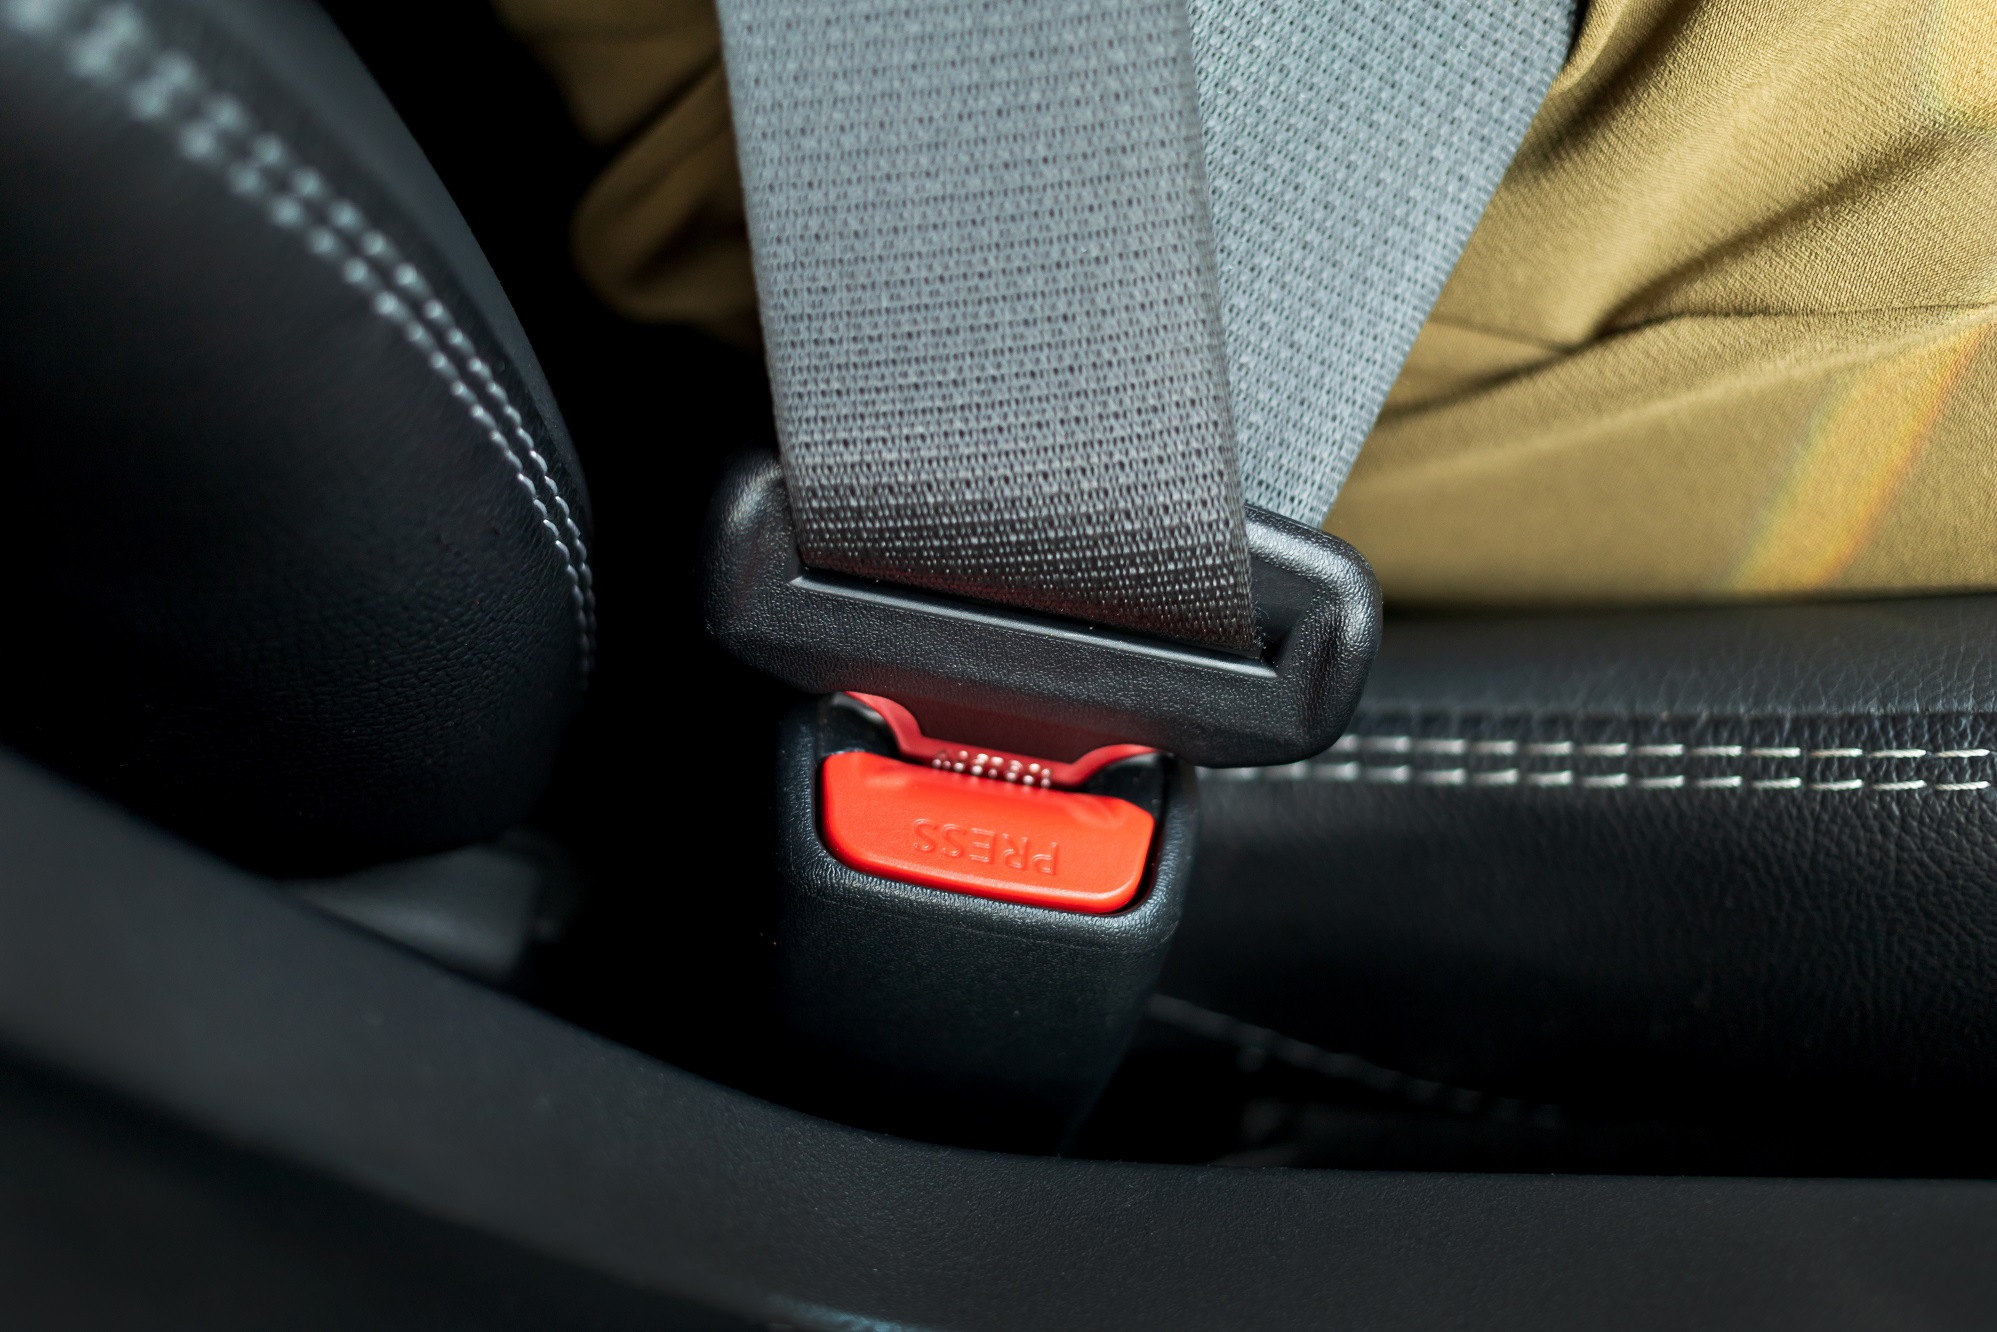 Seatbelt buckle guards must not be used, DVSA warns - routeone